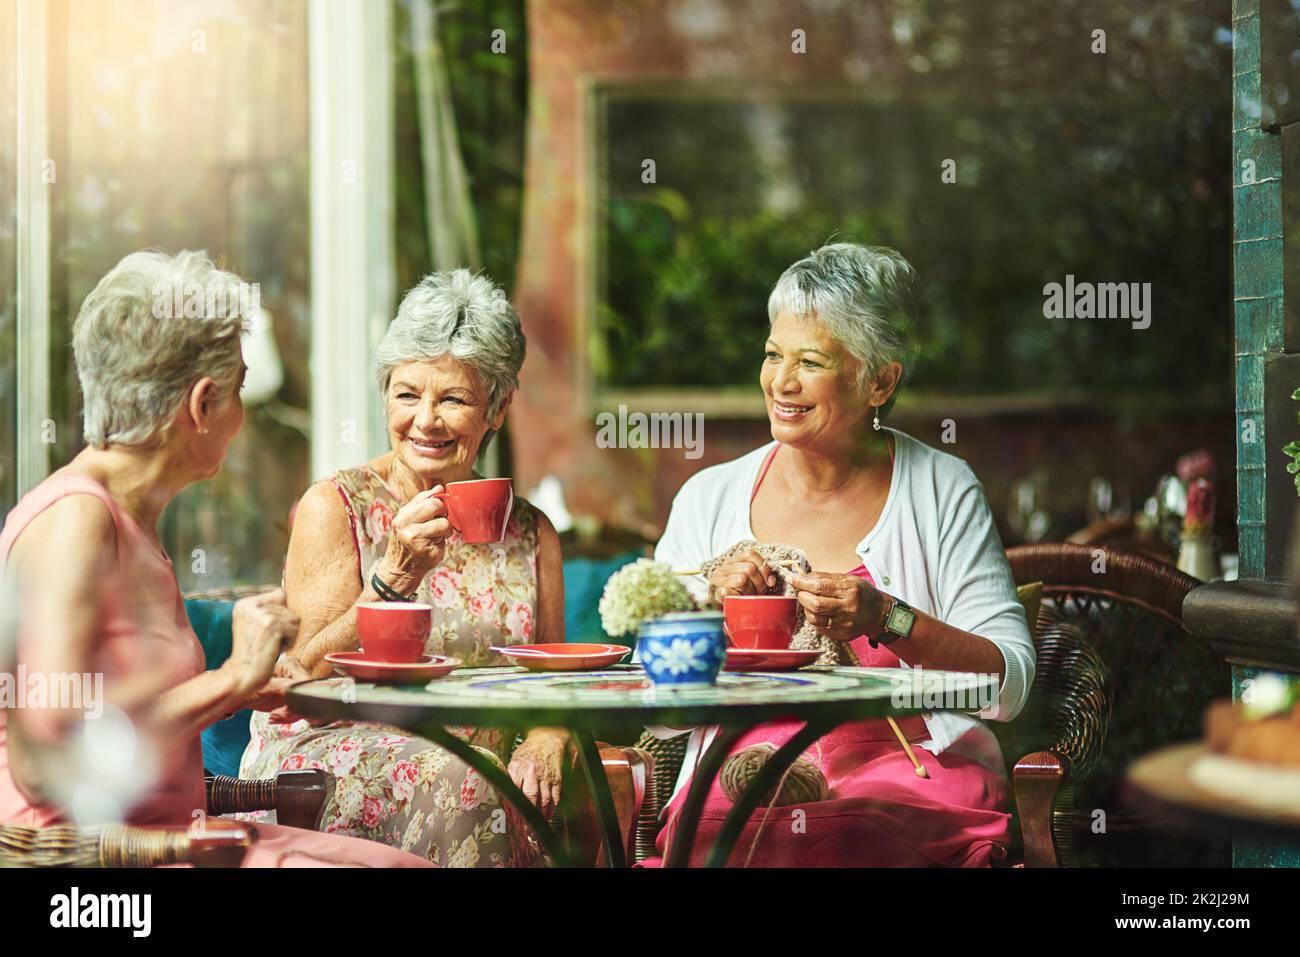 Making time to catch up with good old friends. Cropped shot of a group of senior female friends enjoying a lunch date. Stock Photo